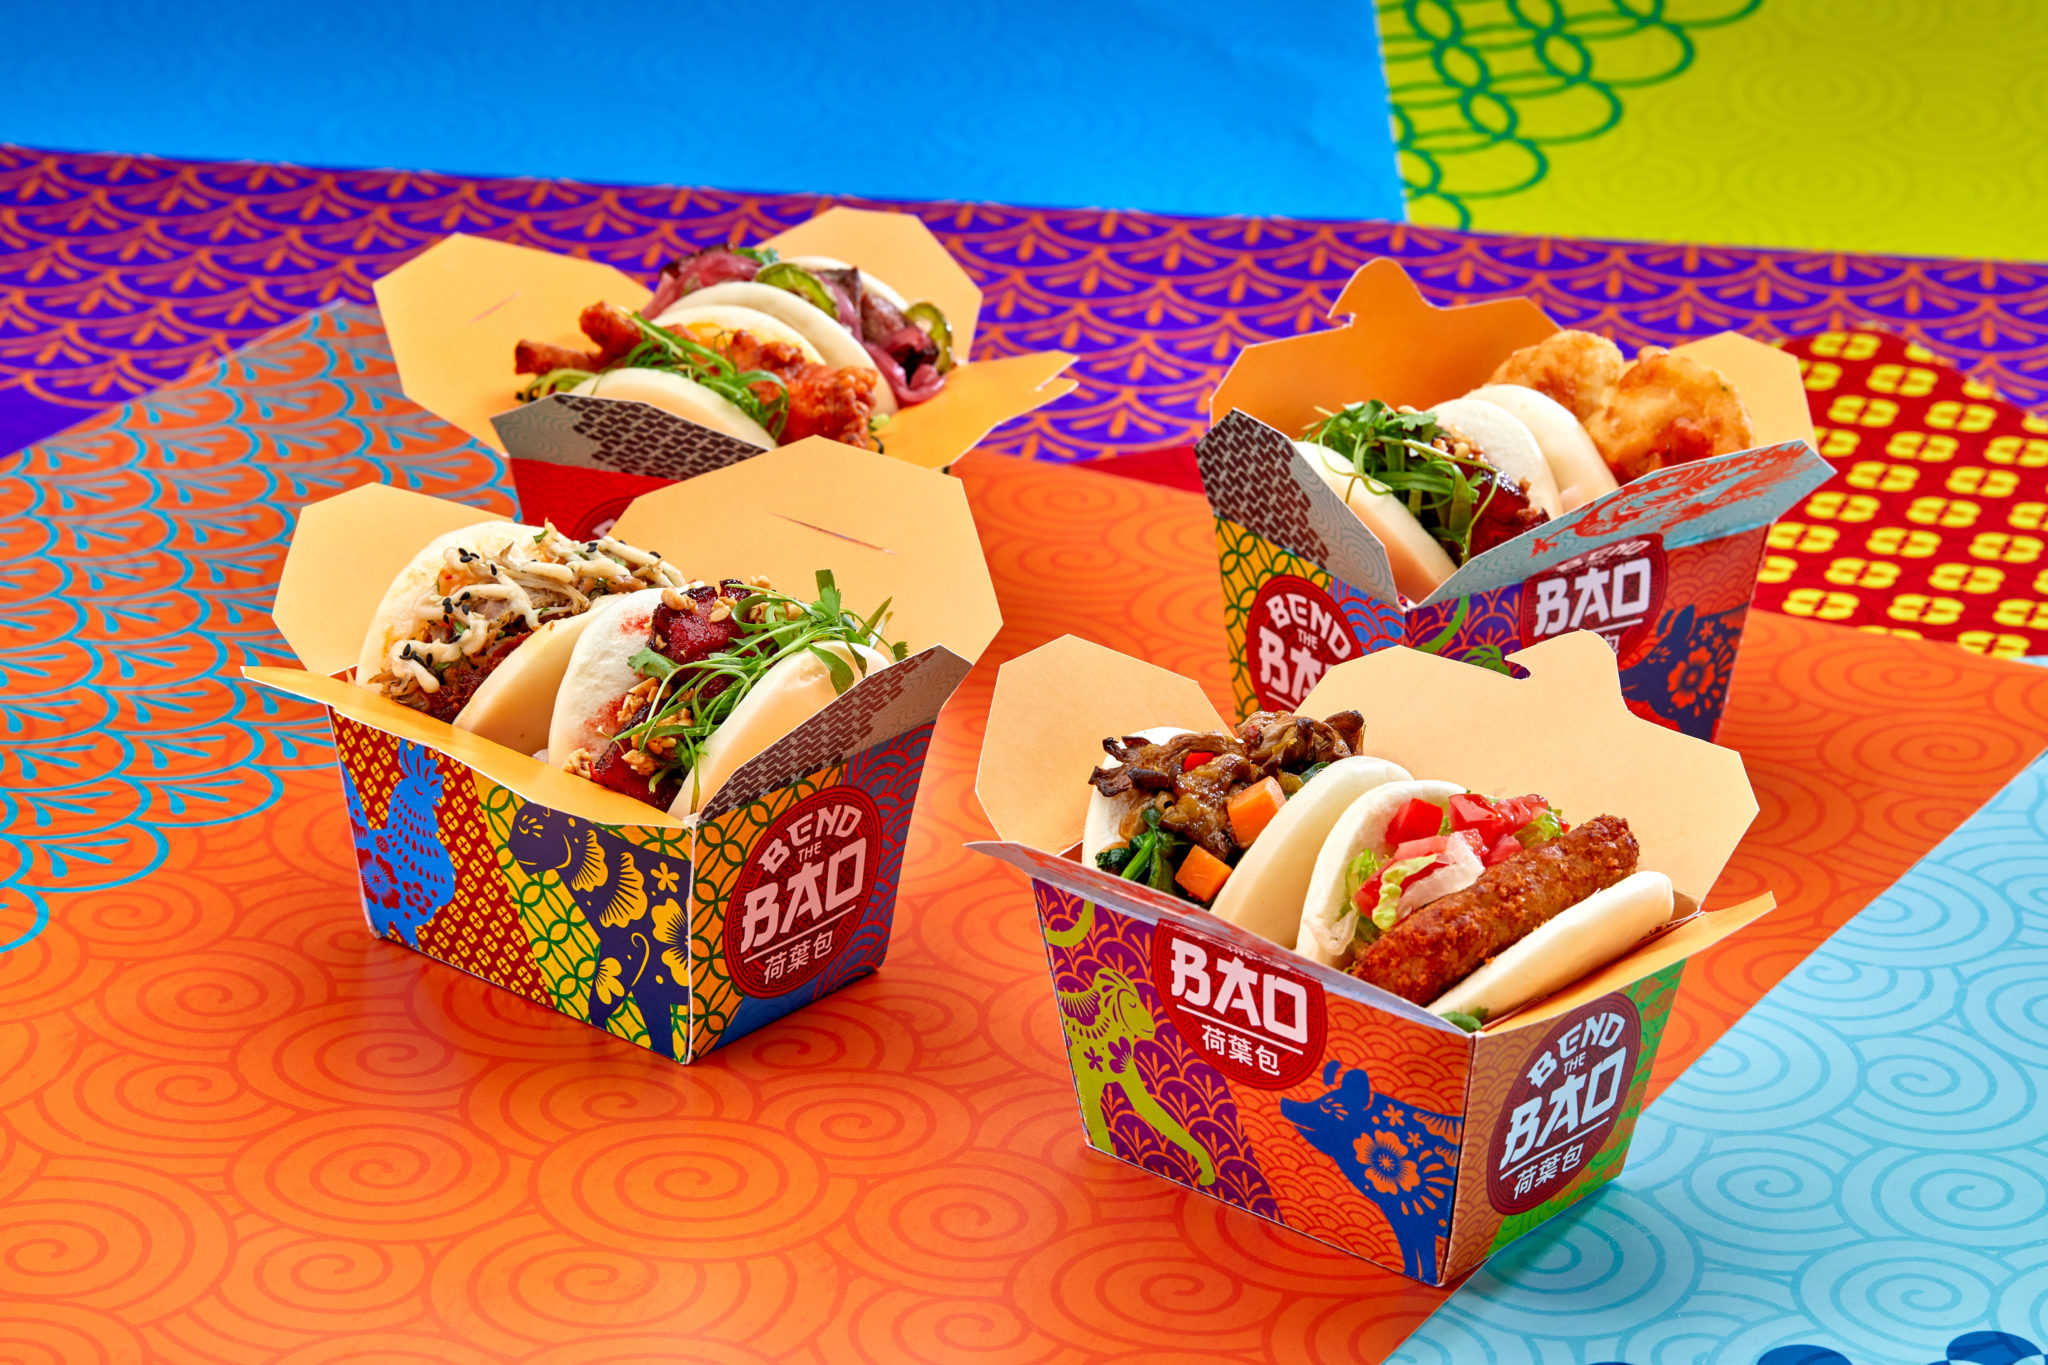  Bend The Bao Set to Open June 15th at Universal CityWalk at Universal Studios Orlando